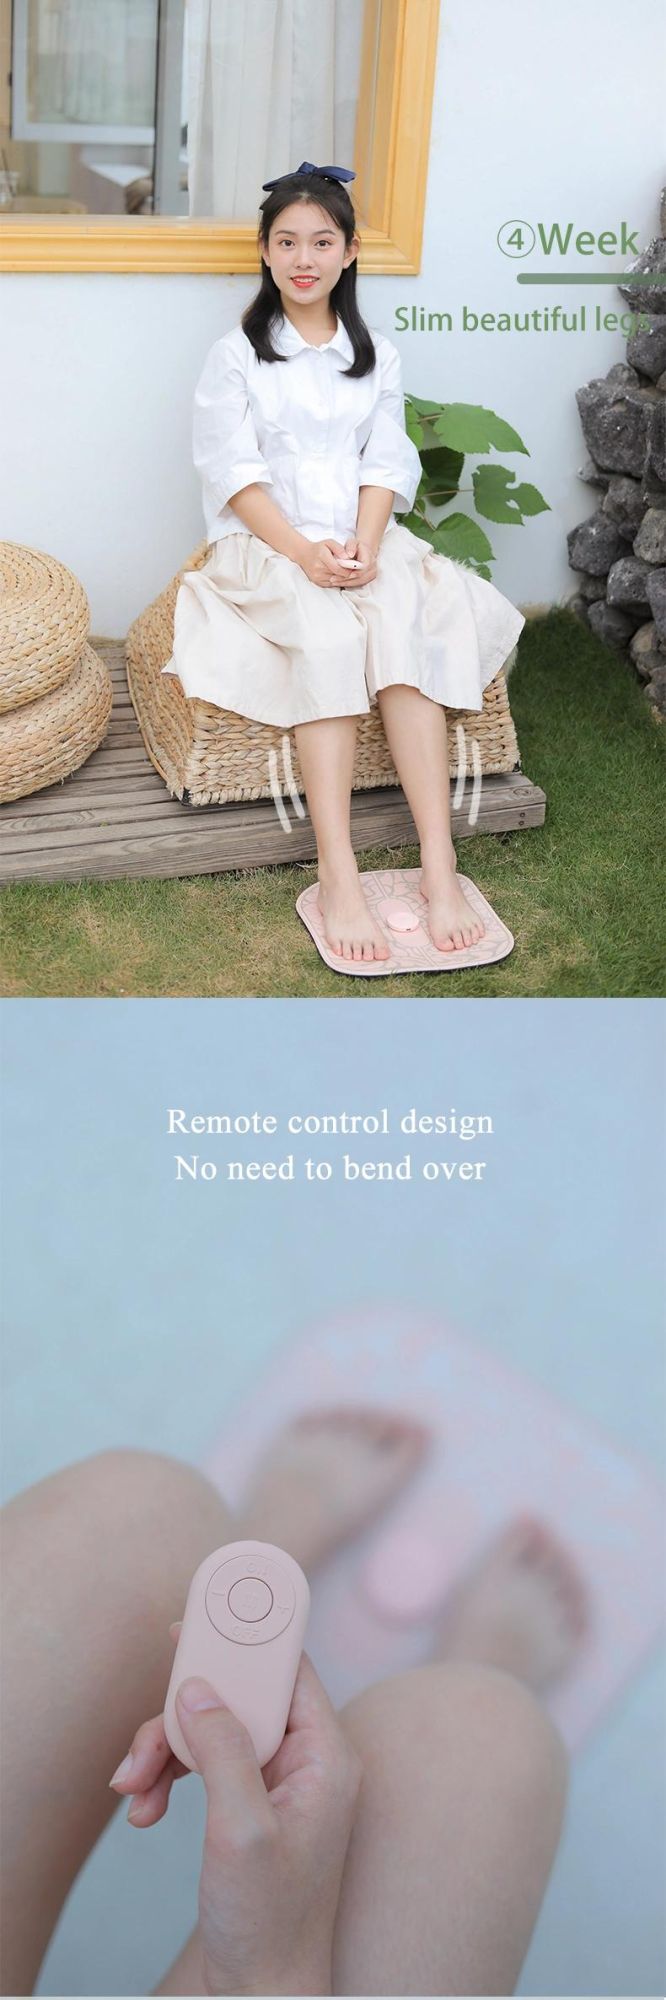 Deluxe Remote Control Foot Leg Massager Roller